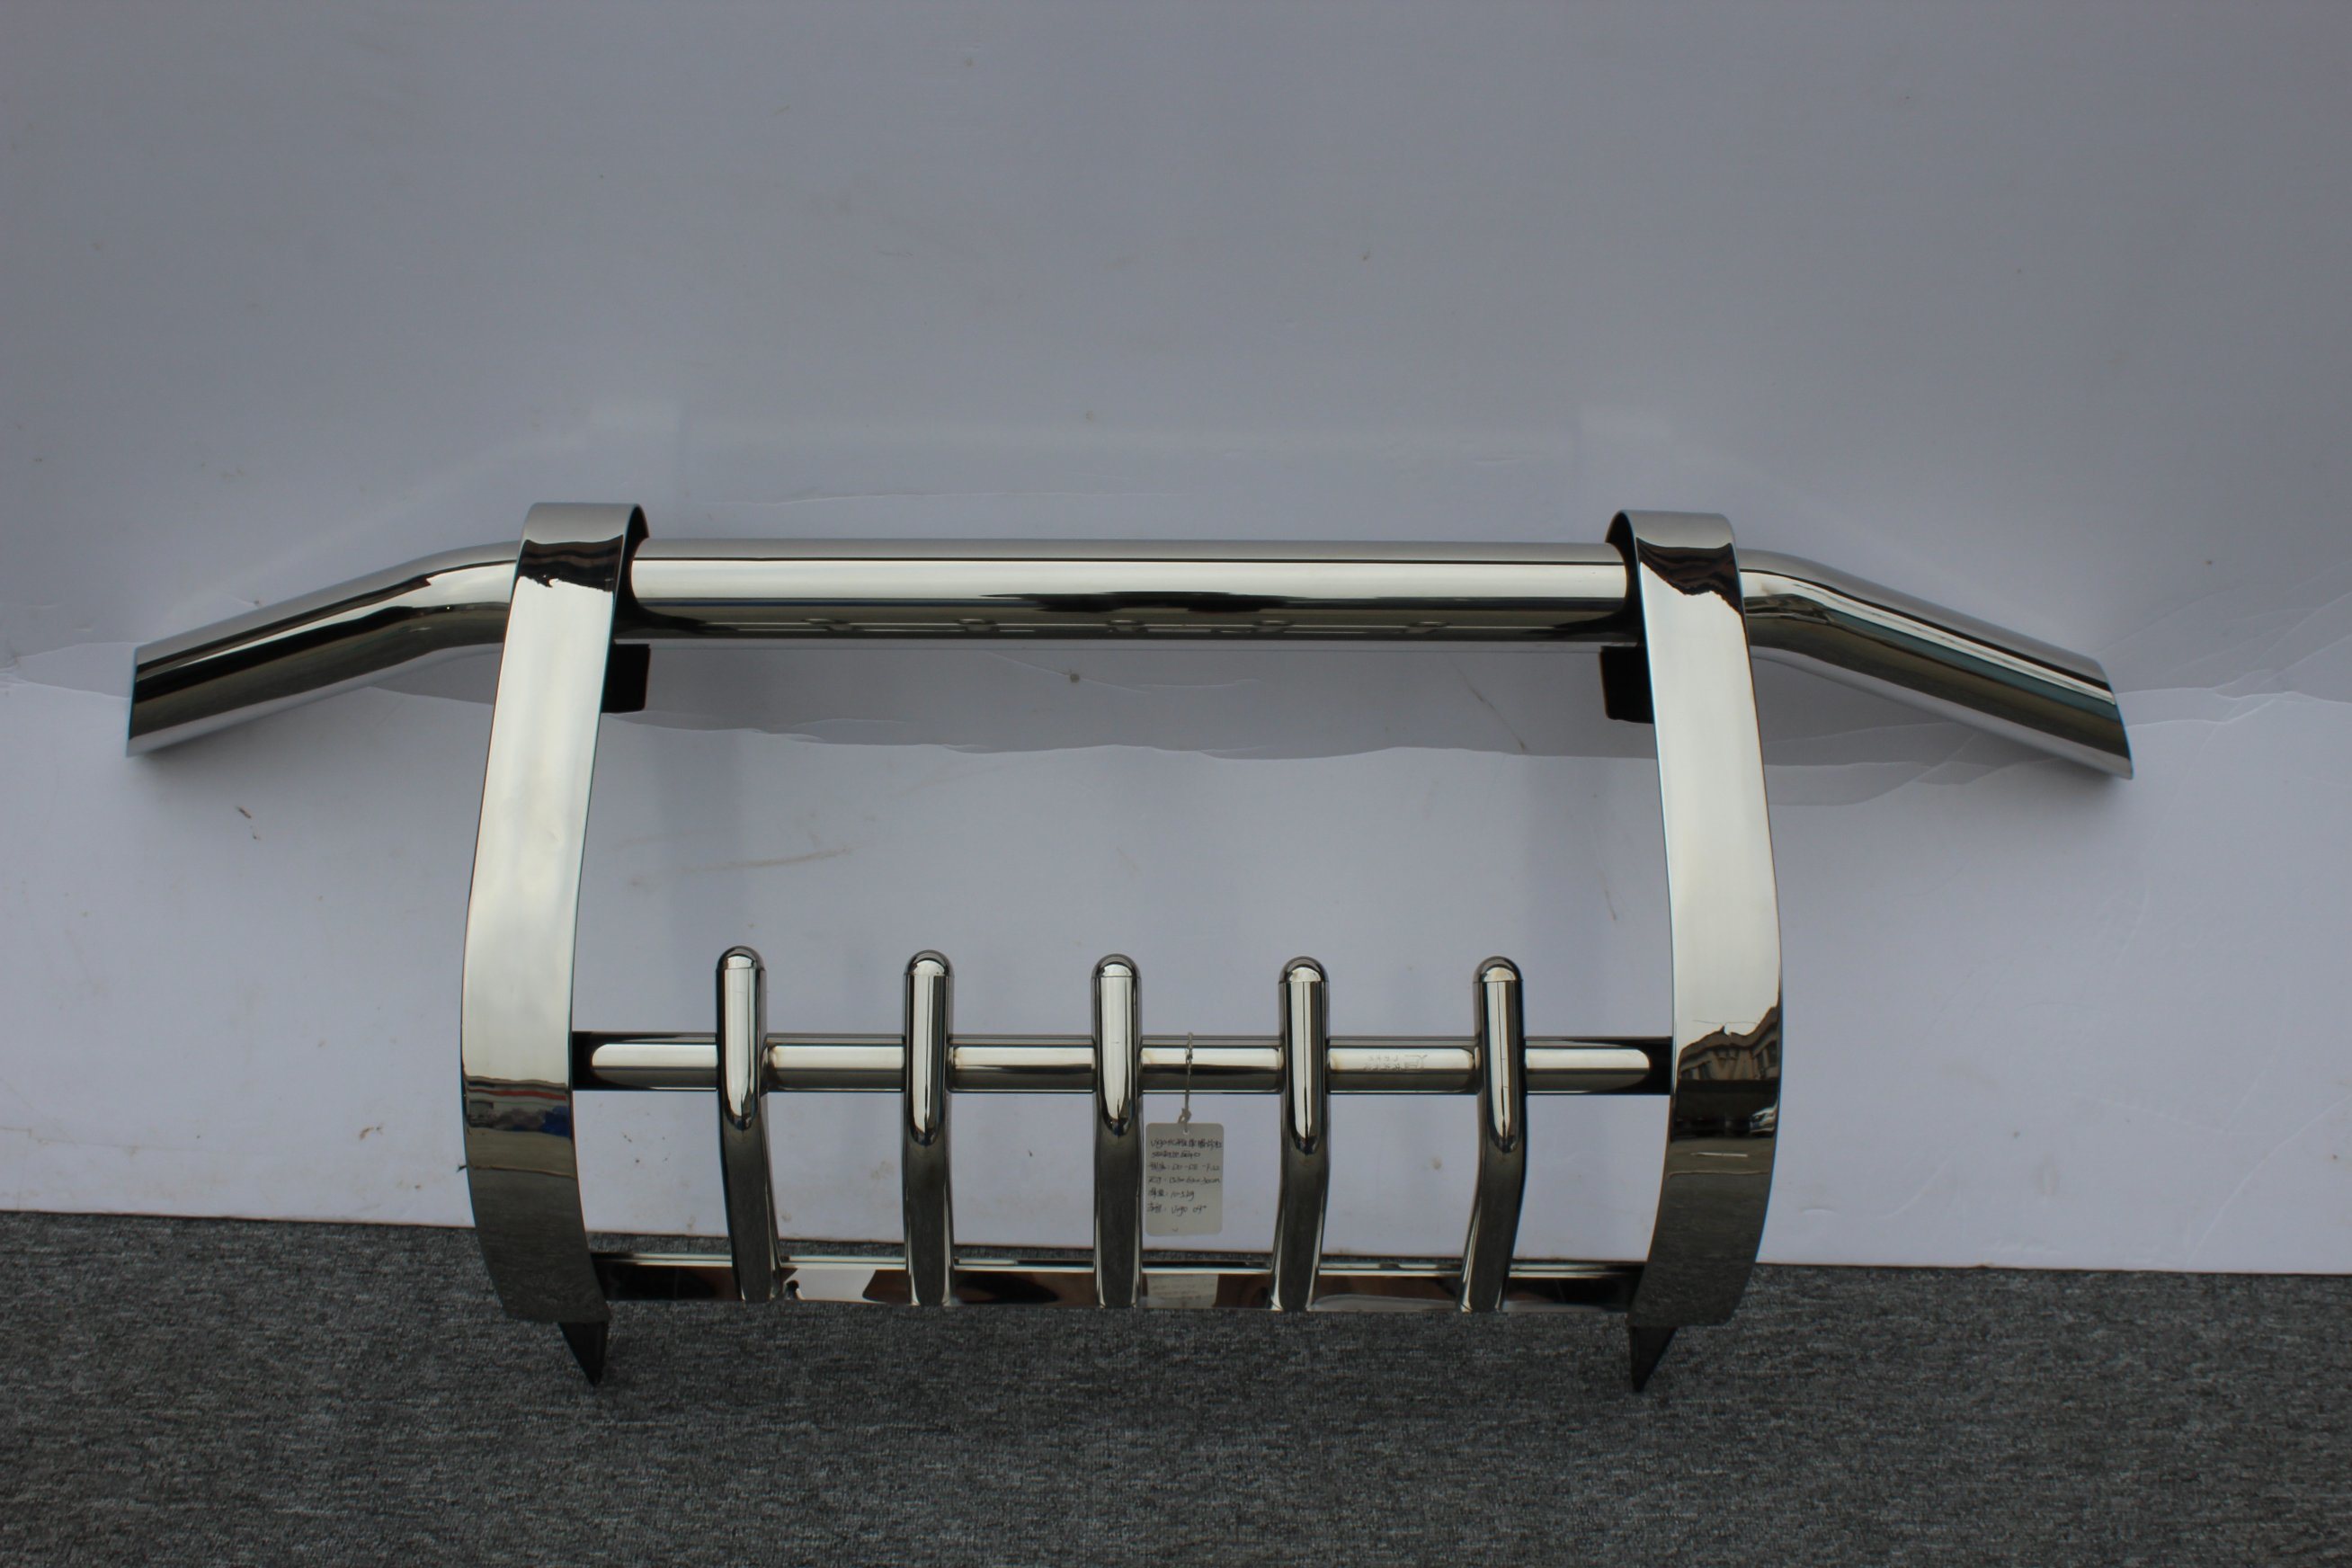 Stainless Steel Car Bumper for Toyota Hilux 2009-2017